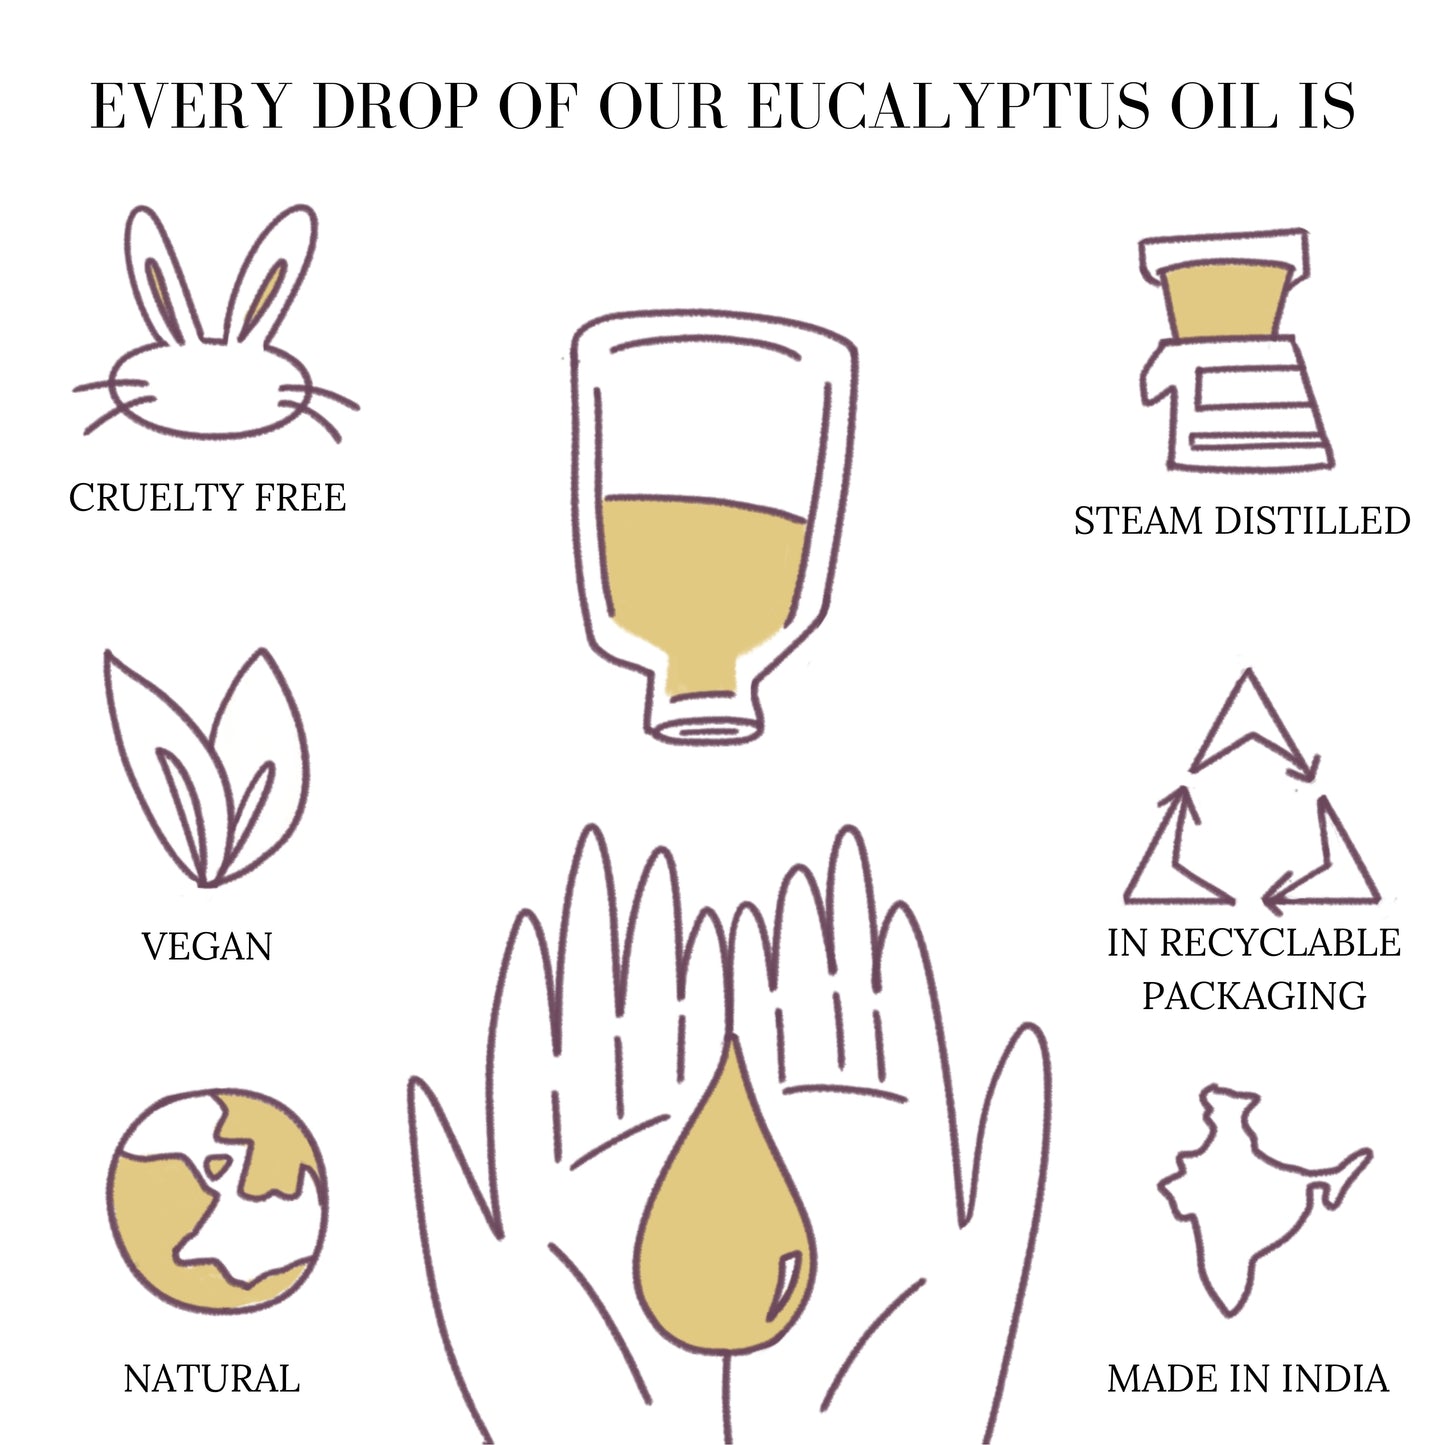 Combo of Eucalyptus and Clove Essential Oil